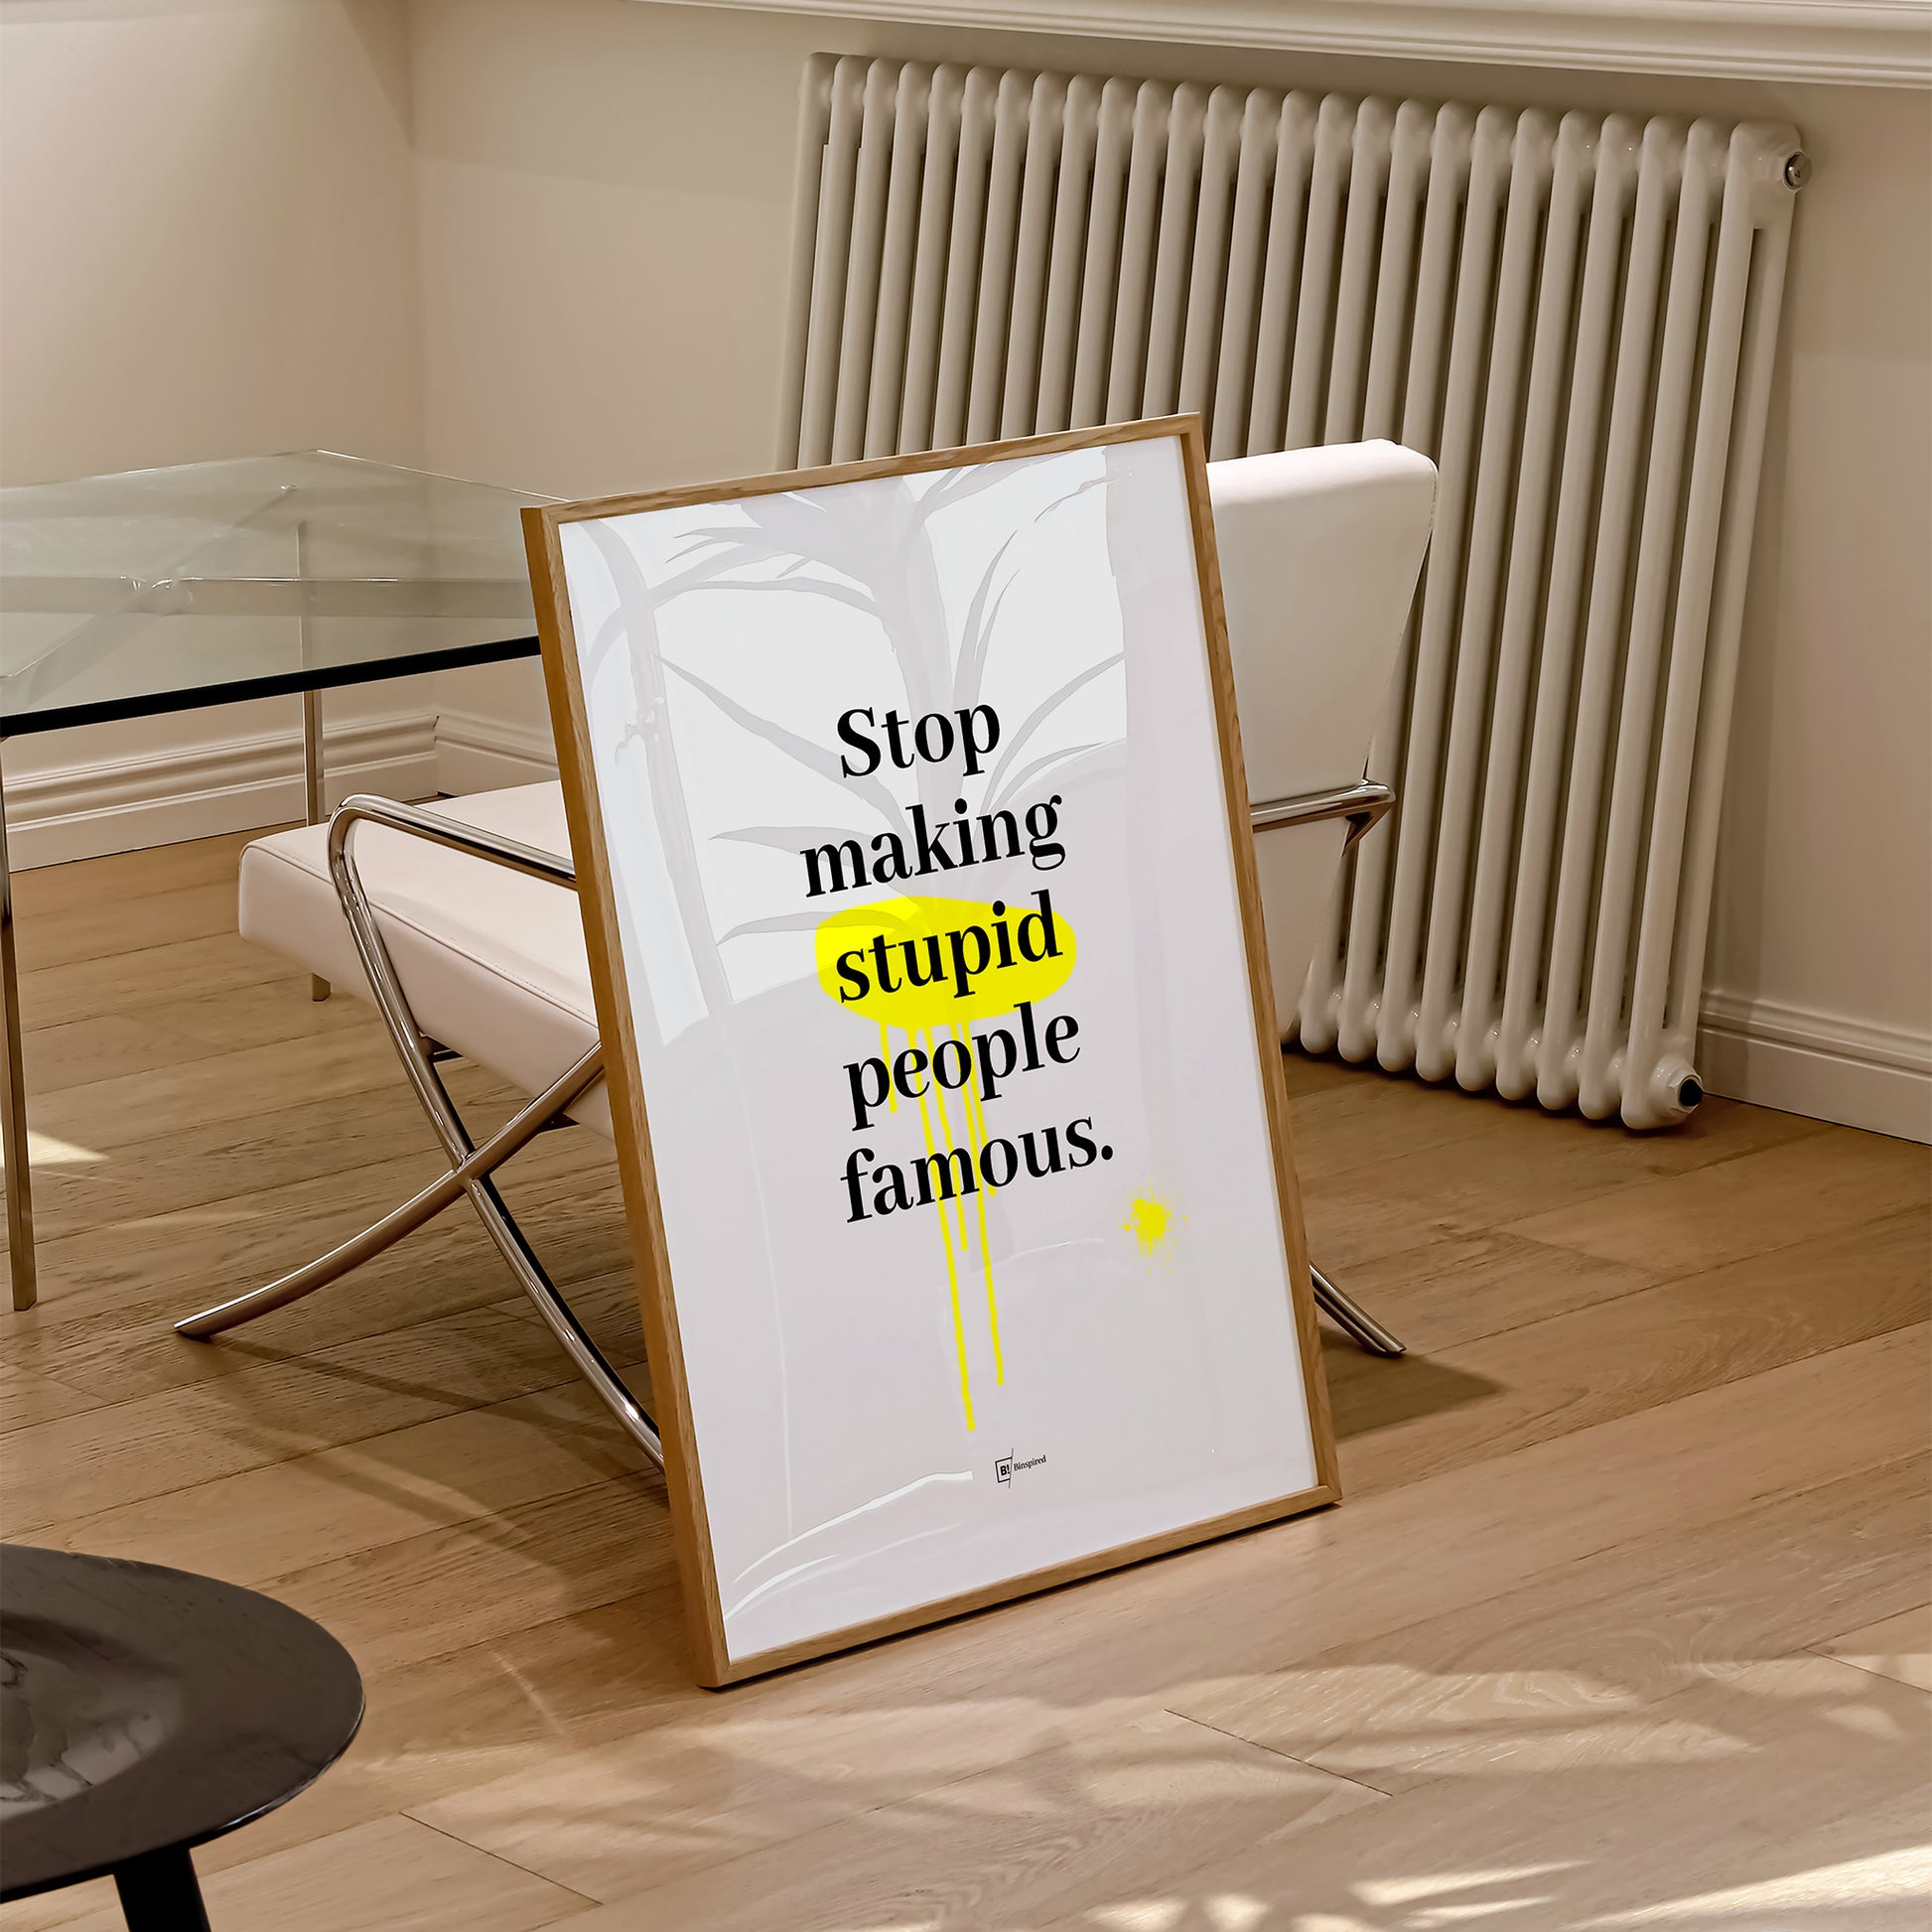 Be inspired by our "Stop making stupid people famous" quote art print! This artwork was printed using the giclée process on archival acid-free paper and is presented in a natural oak frame that captures its timeless beauty in every detail.